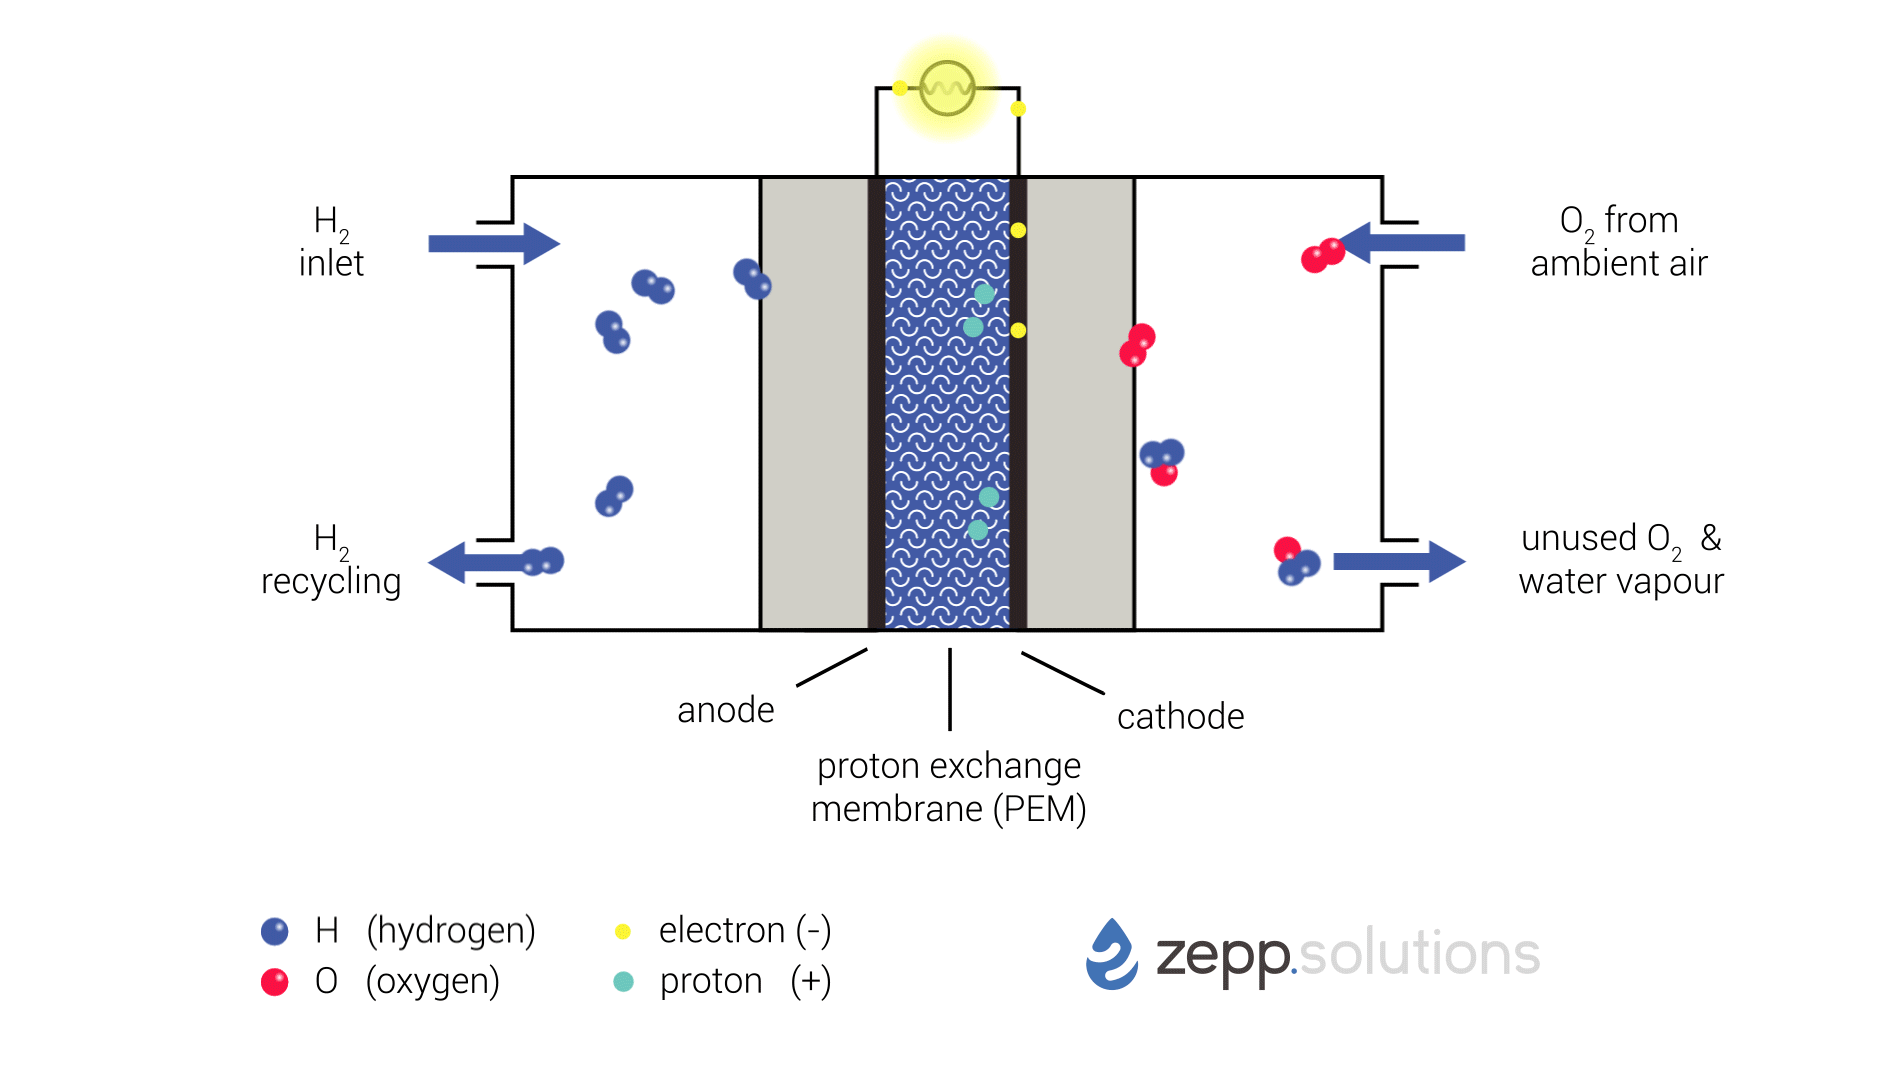 Animation schematically displaying an overview of the inner workings of a "Proton Exchange Membrane" (PEM) Hydrogen Fuel Cell. What's displayed: Hydrogen enters the fuel cell on the top left and splits into two protons and two electrons at the anode side. Hydrogen that doesn’t react is recirculated. The protons pass through the proton exchange membrane (PEM) in the middle, while the electrons take a detour. The electrons taking this detour provide the electrical energy used to power the application. On the right side of the PEM, at the cathode side, oxygen (O2) is split up and meets up with the protons and electrons. The protons and electrons together form hydrogen (H2), which bonds to the oxygen, resulting in water (H2O).